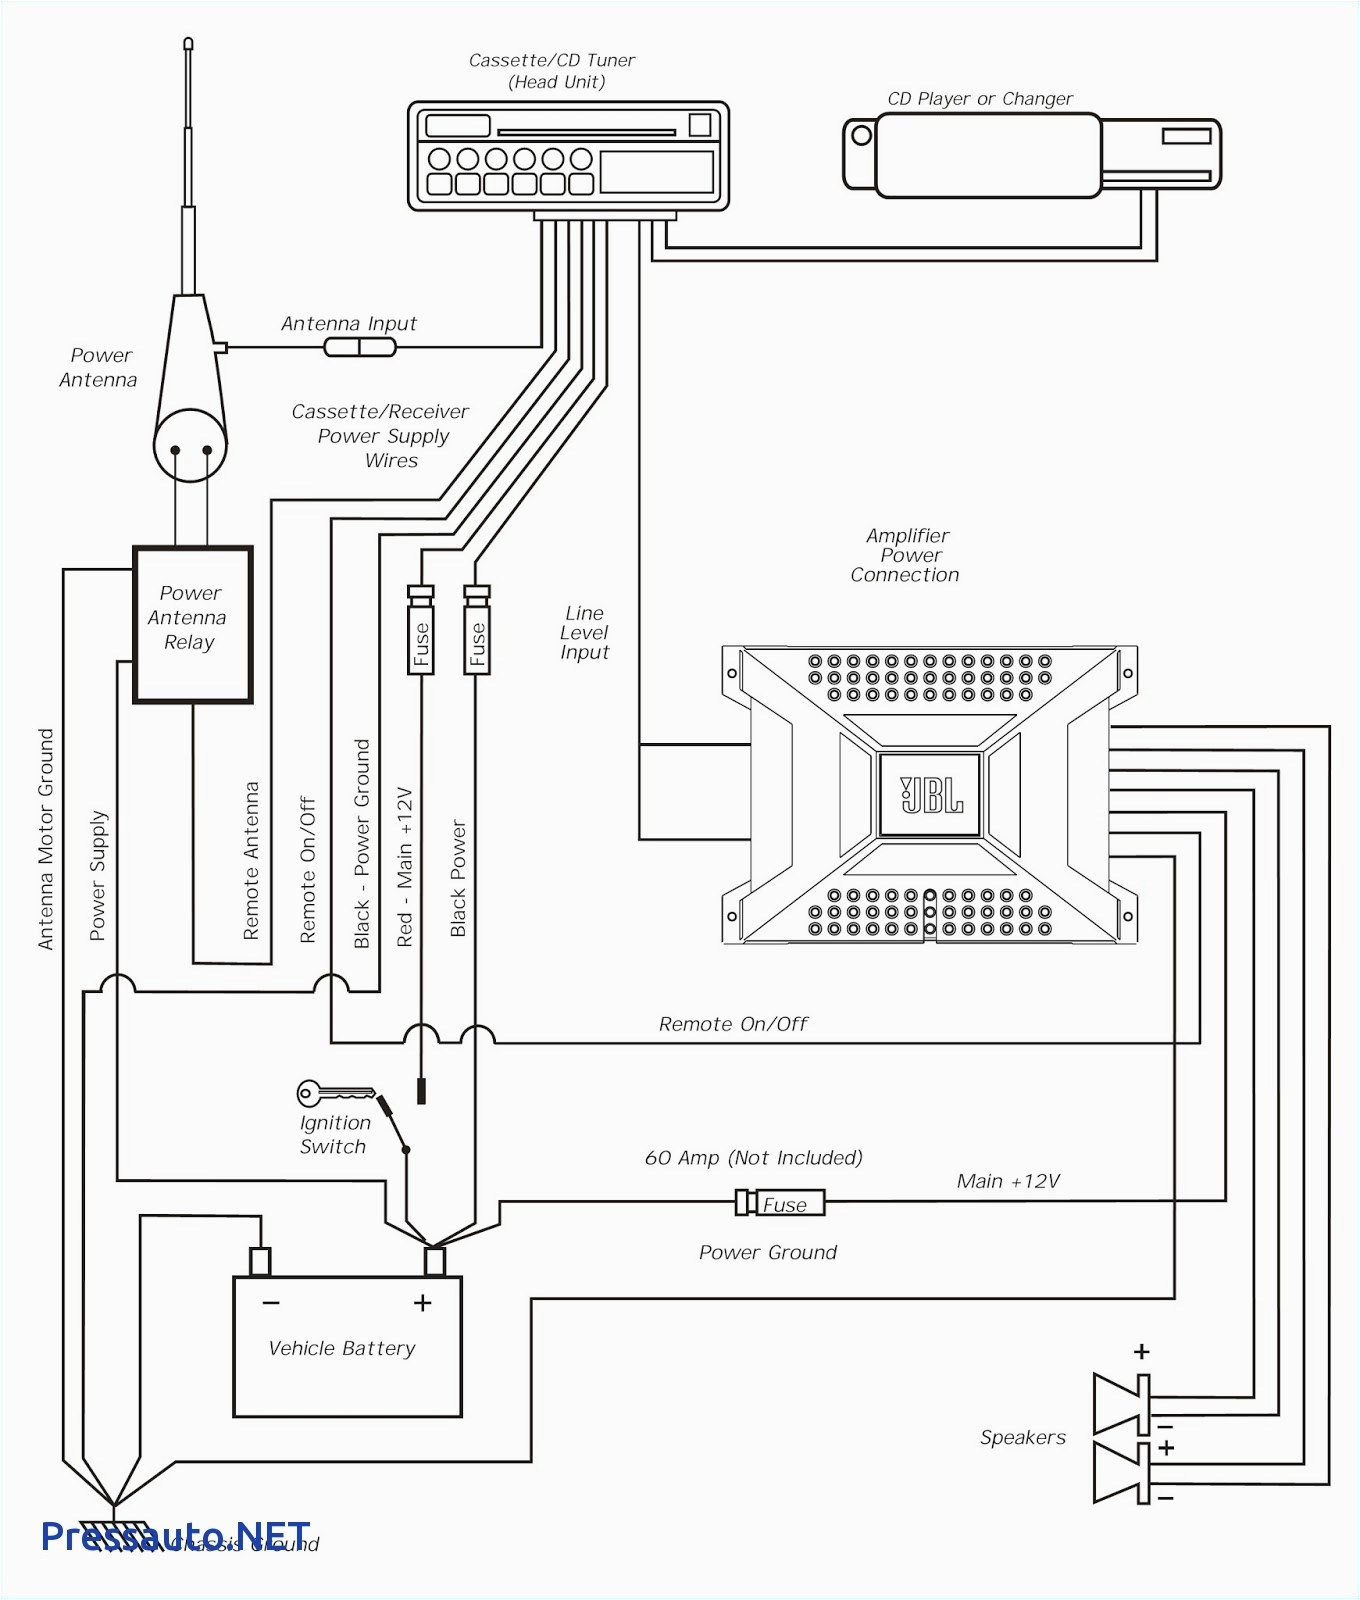 sennheiser hd 280 pro wiring diagram best of how to read wiring diagrams for cars pickenscountymedicalcenter